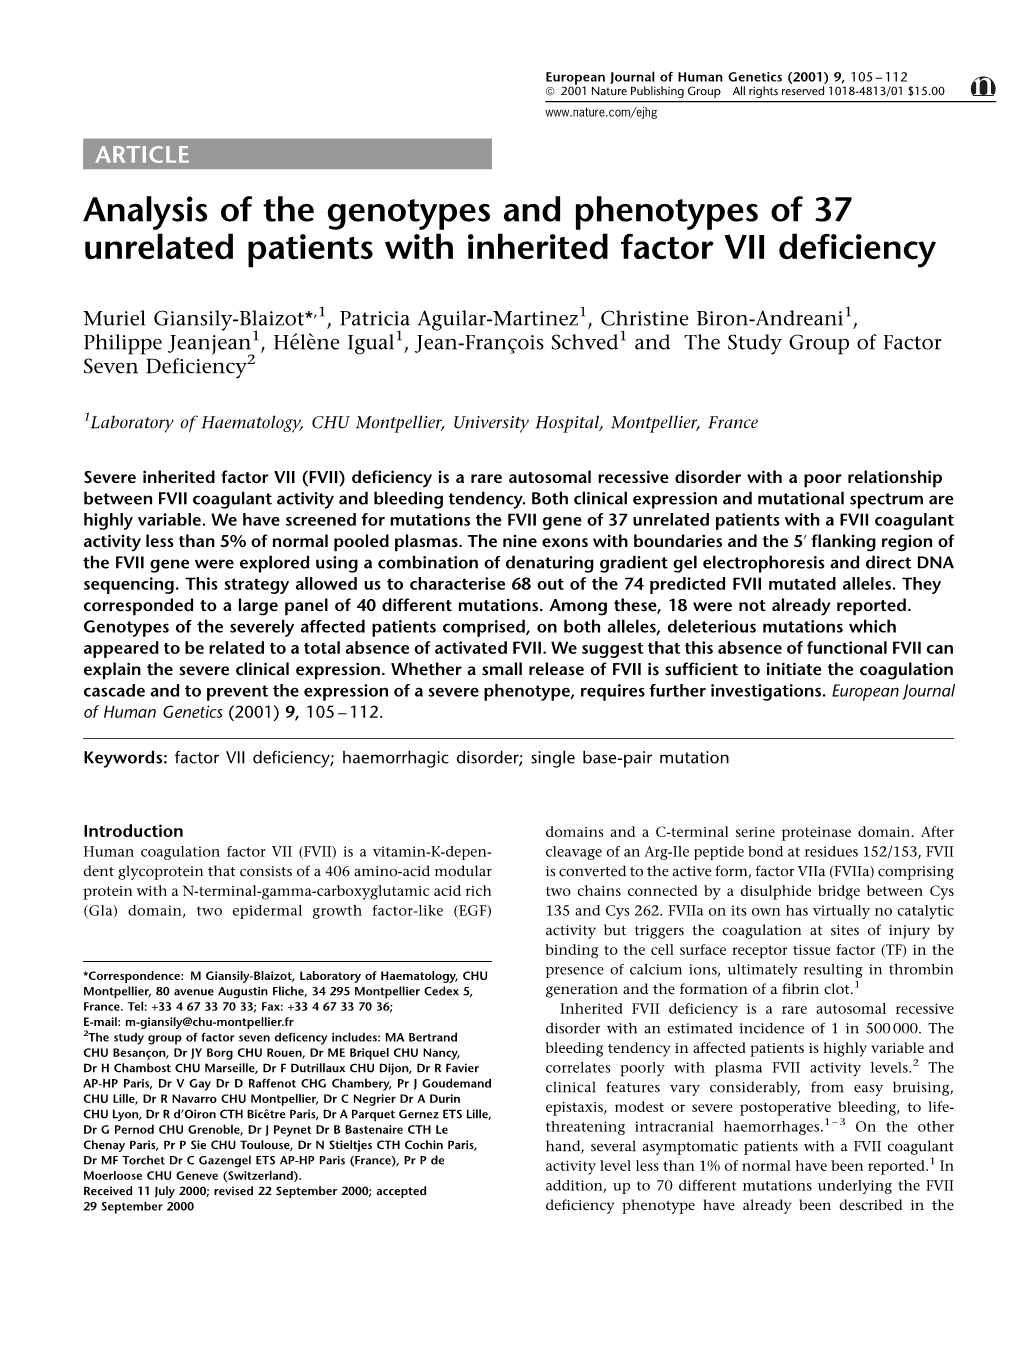 Analysis of the Genotypes and Phenotypes of 37 Unrelated Patients with Inherited Factor VII Deficiency